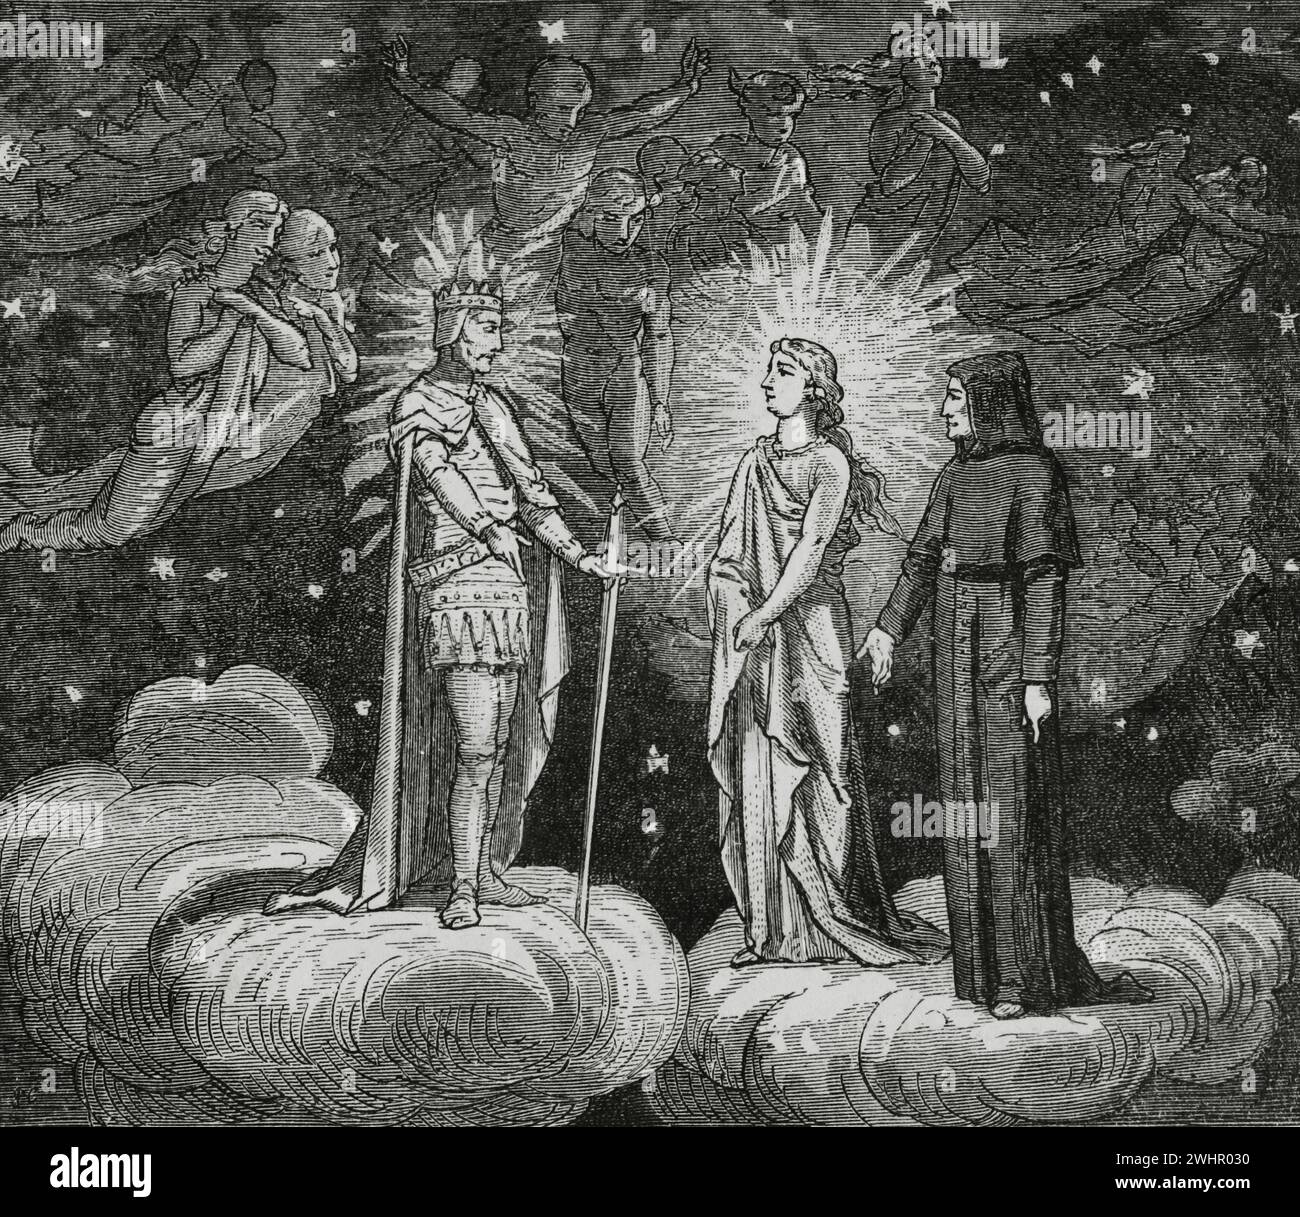 The Divine Comedy (1307-1321). Italian narrative poem by the Italian poet Dante Alighieri (1265-1321). The Paradise. 'Already flashed upon my forehead the crown...' Illustration by Yann Dargent (1824-1899). Engraving. Published in Paris, 1888. Stock Photo